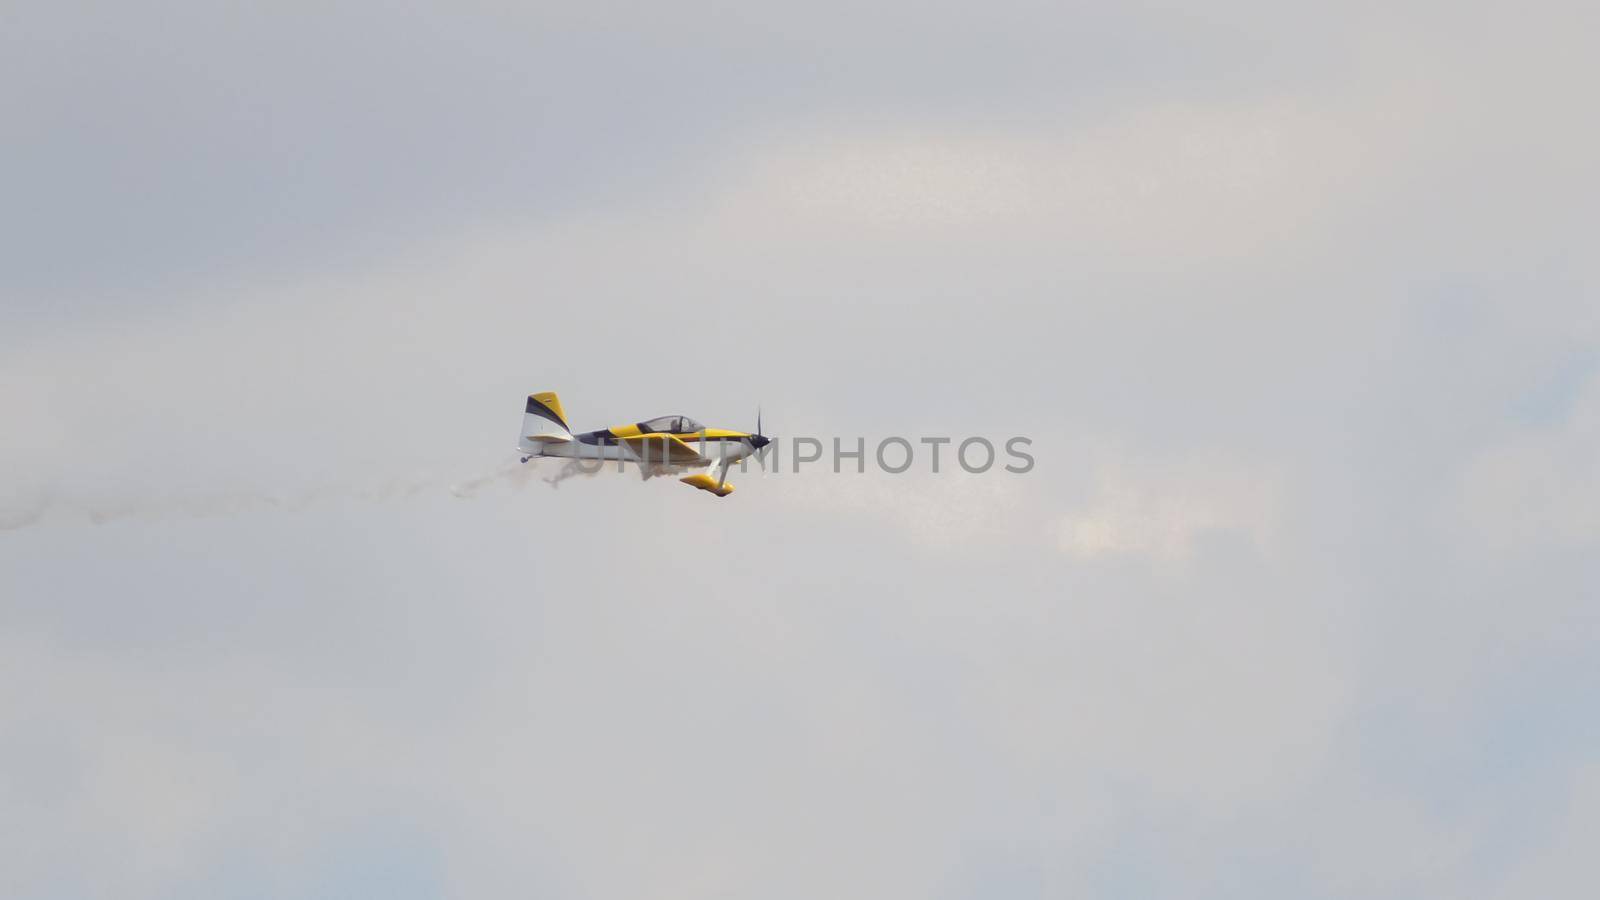 Small yellow Airplane flying in an extreme acrobatics exhibition, telephoto